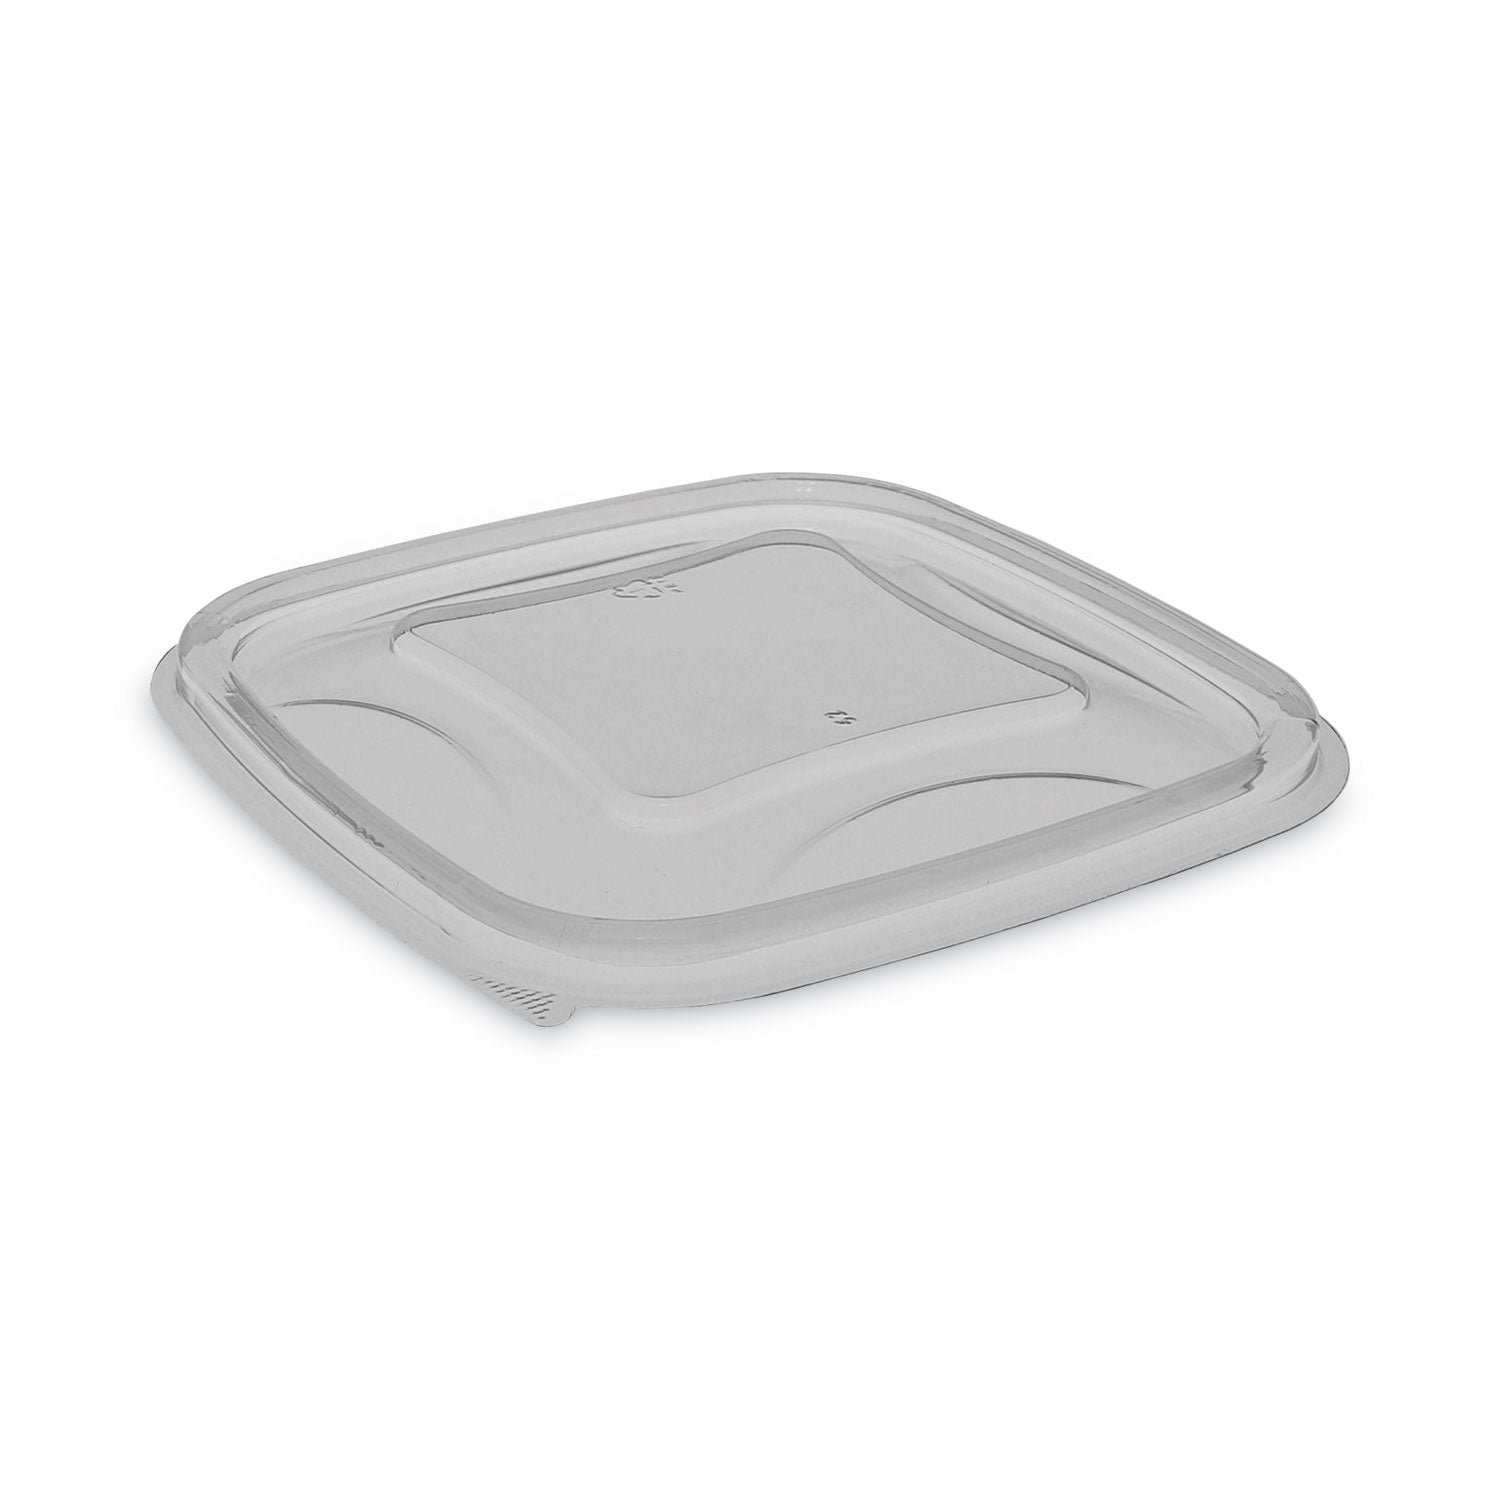 earthchoice-square-recycled-bowl-flat-lid-55-x-55-x-075-clear-plastic-504-carton_pctysaclf05 - 1